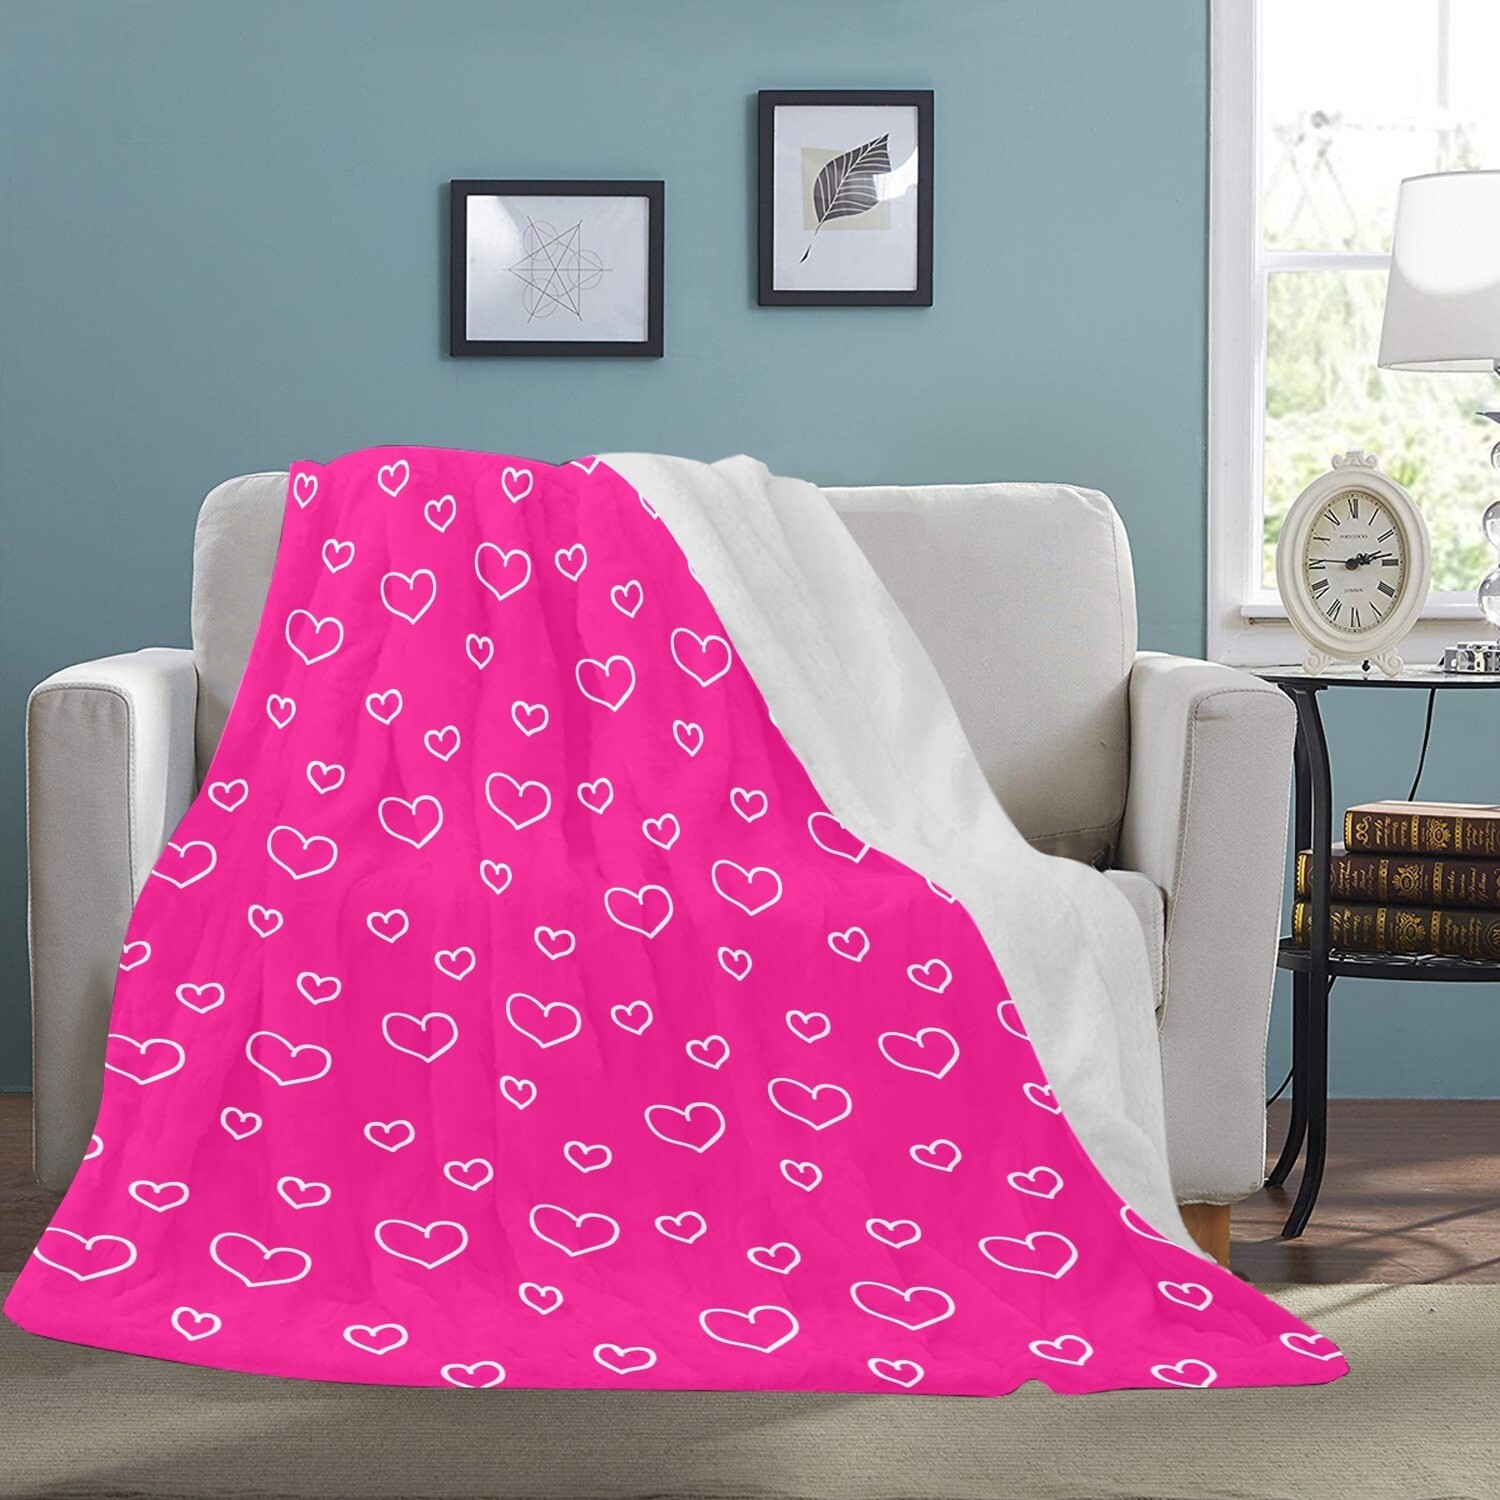 🤴🏽👸🏽💕Large Ultra-Soft Micro Fleece Blanket Valentine white outline hearts on hot pink, gift, gift for her, gift for him, gift for them, 70"x80"